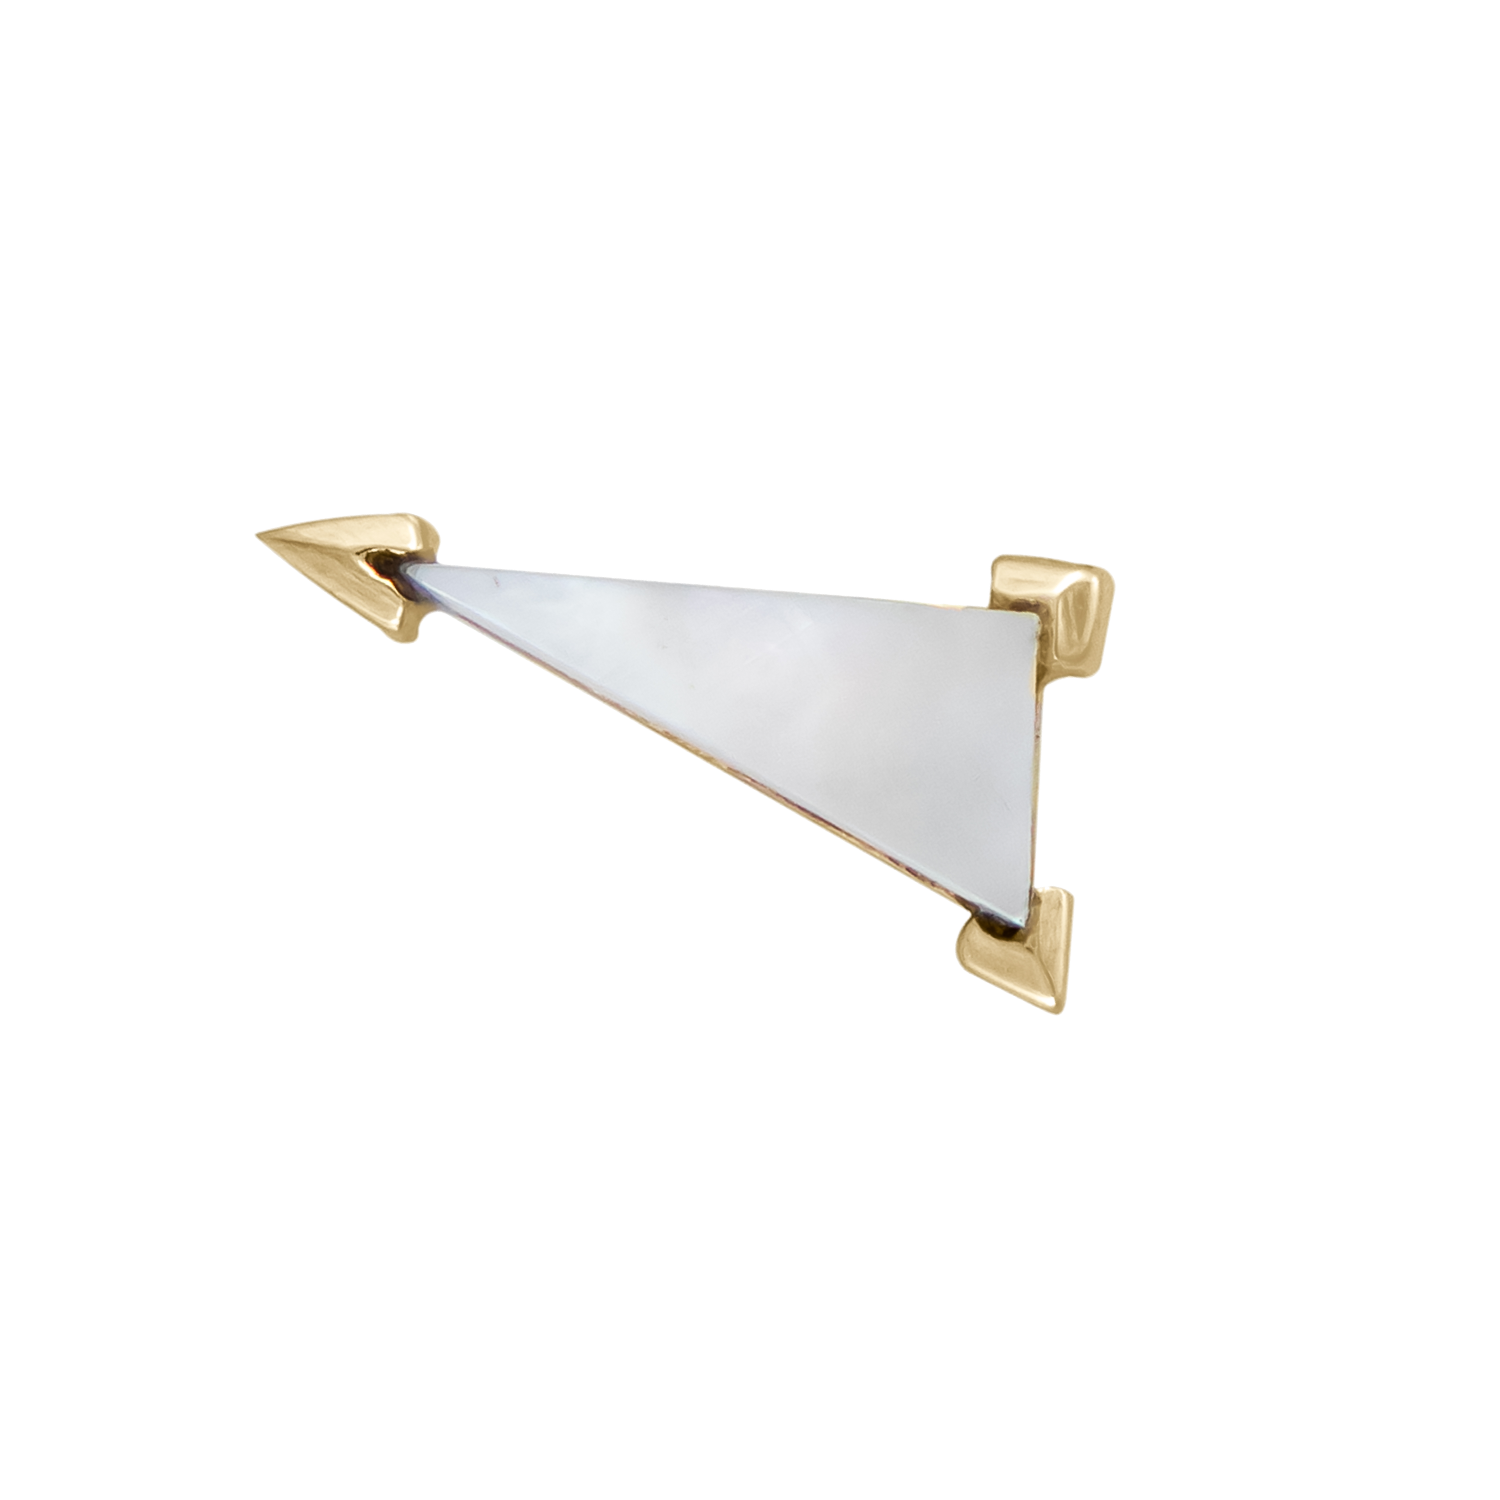 Pearl Elongated Claw Triangle Stud .2